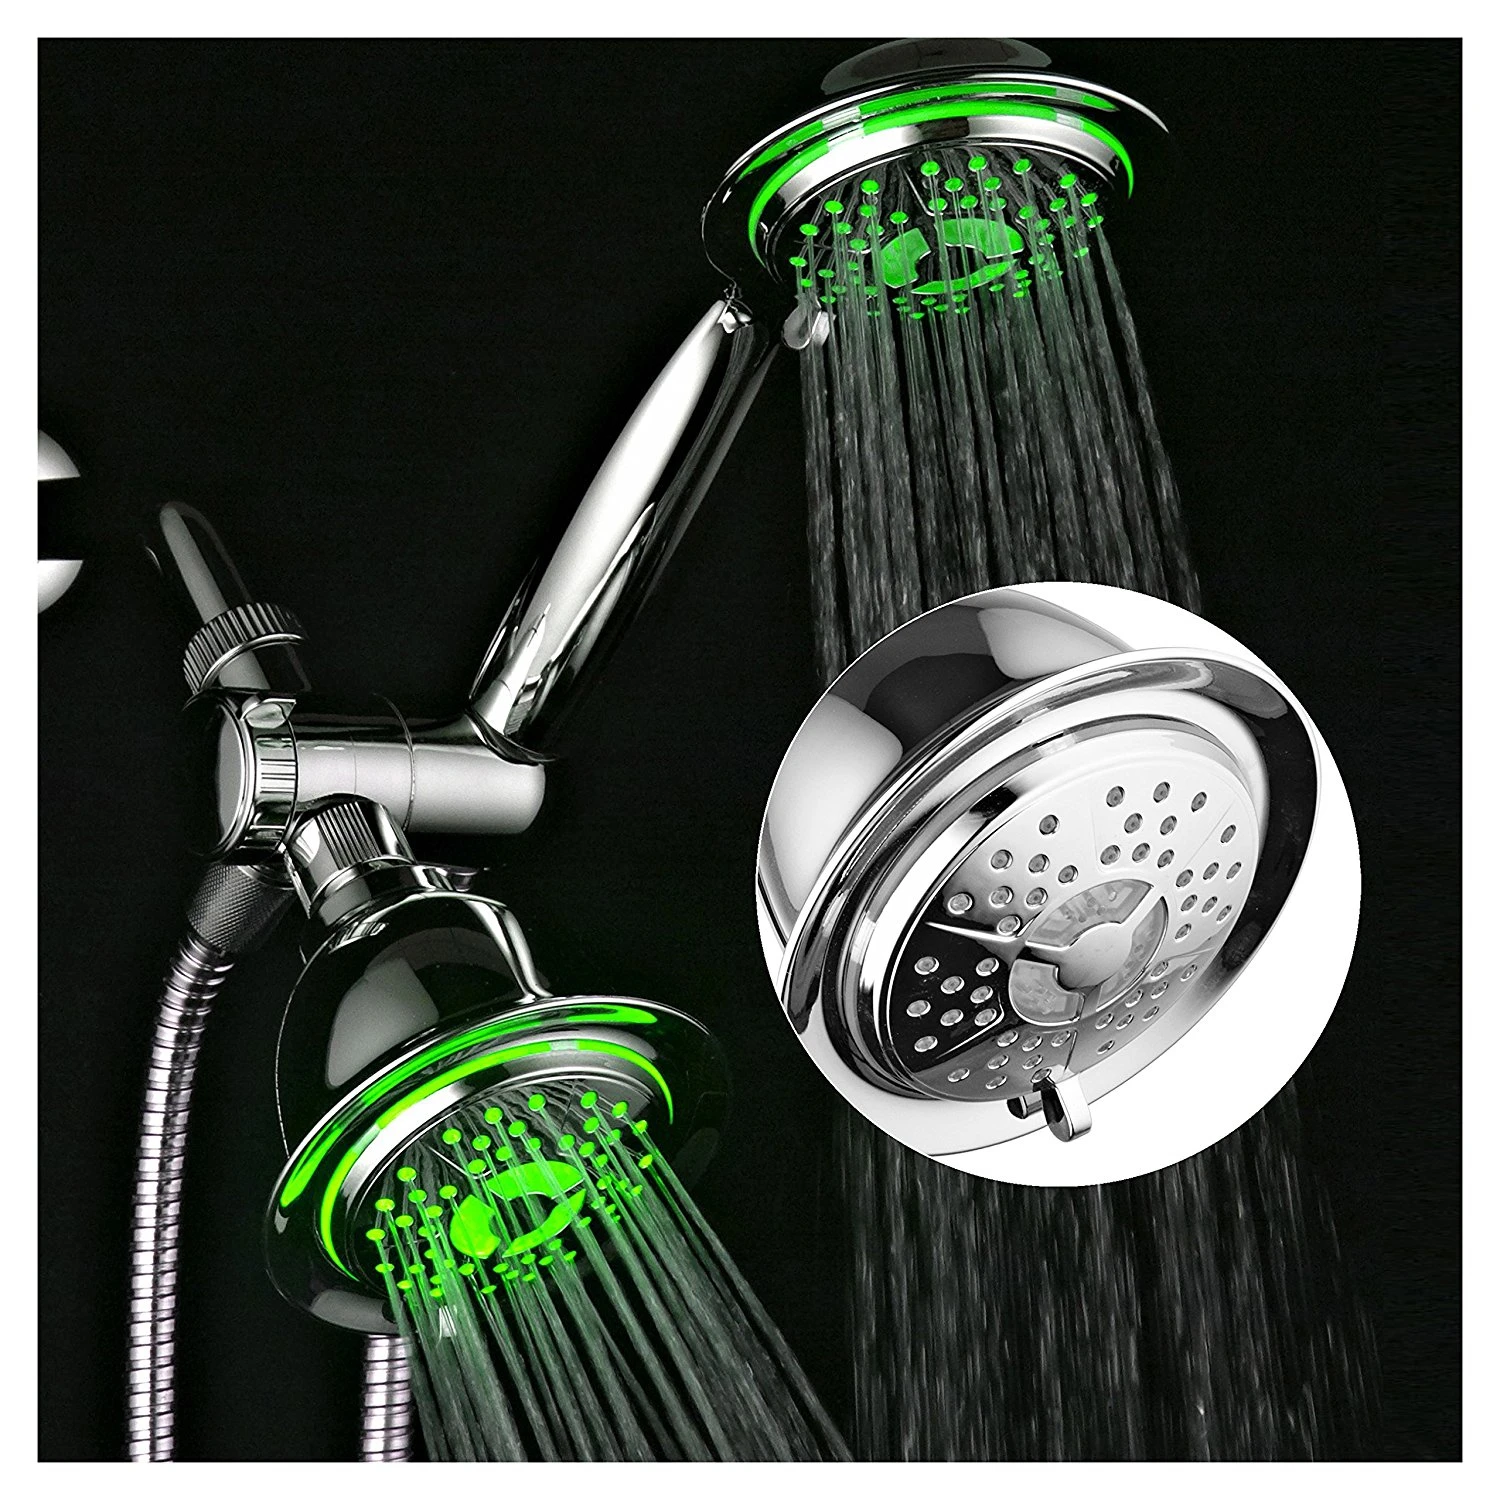 

All-Chrome 3-way LED Twin Shower System with Air Jet LED Turbo Pressure-Boost Nozzle Technology